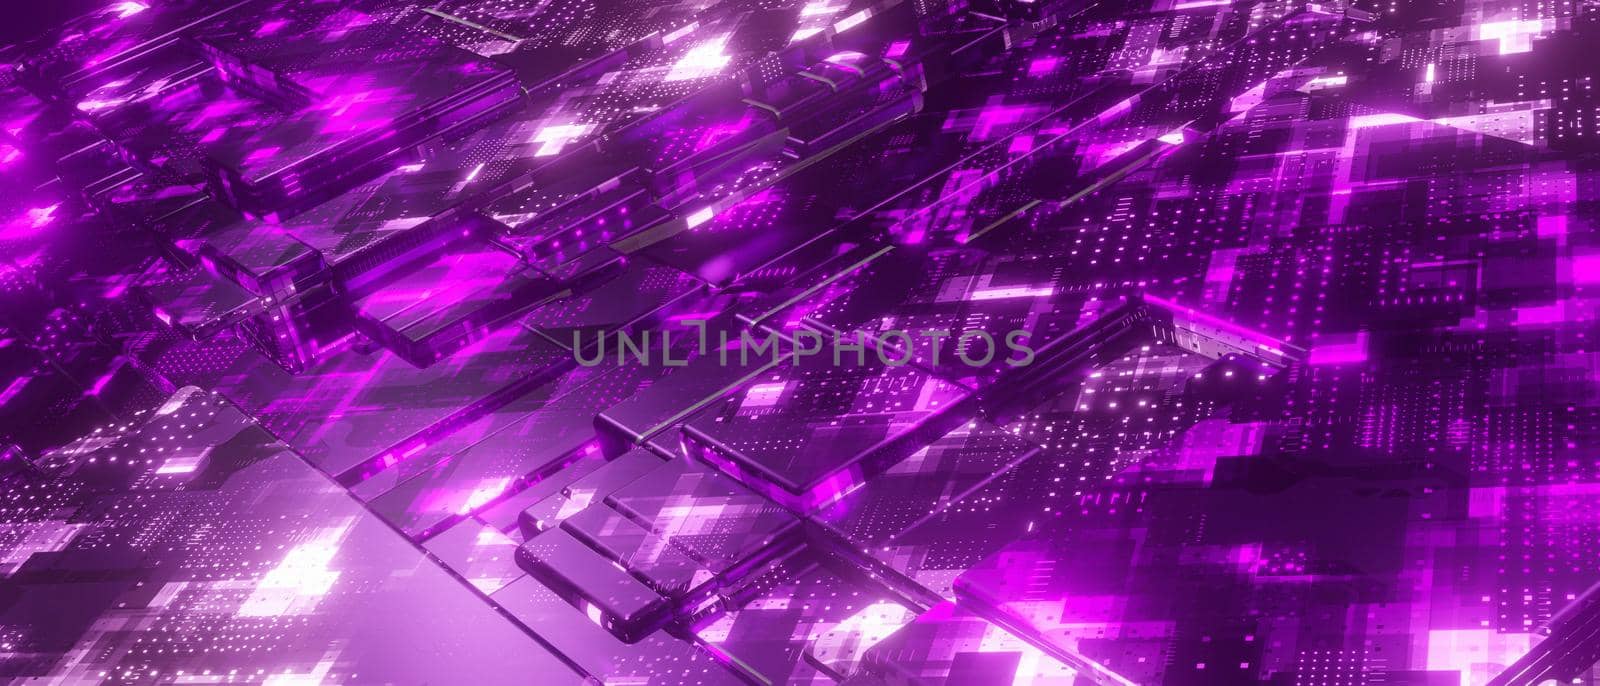 Abstract Amazing Sci-fi Hi-tech Equipment Or Facility Different Moods Digital Deep Violet Illustrative Banner Background Wallpaper Different Concepts 3D Render by yay_lmrb